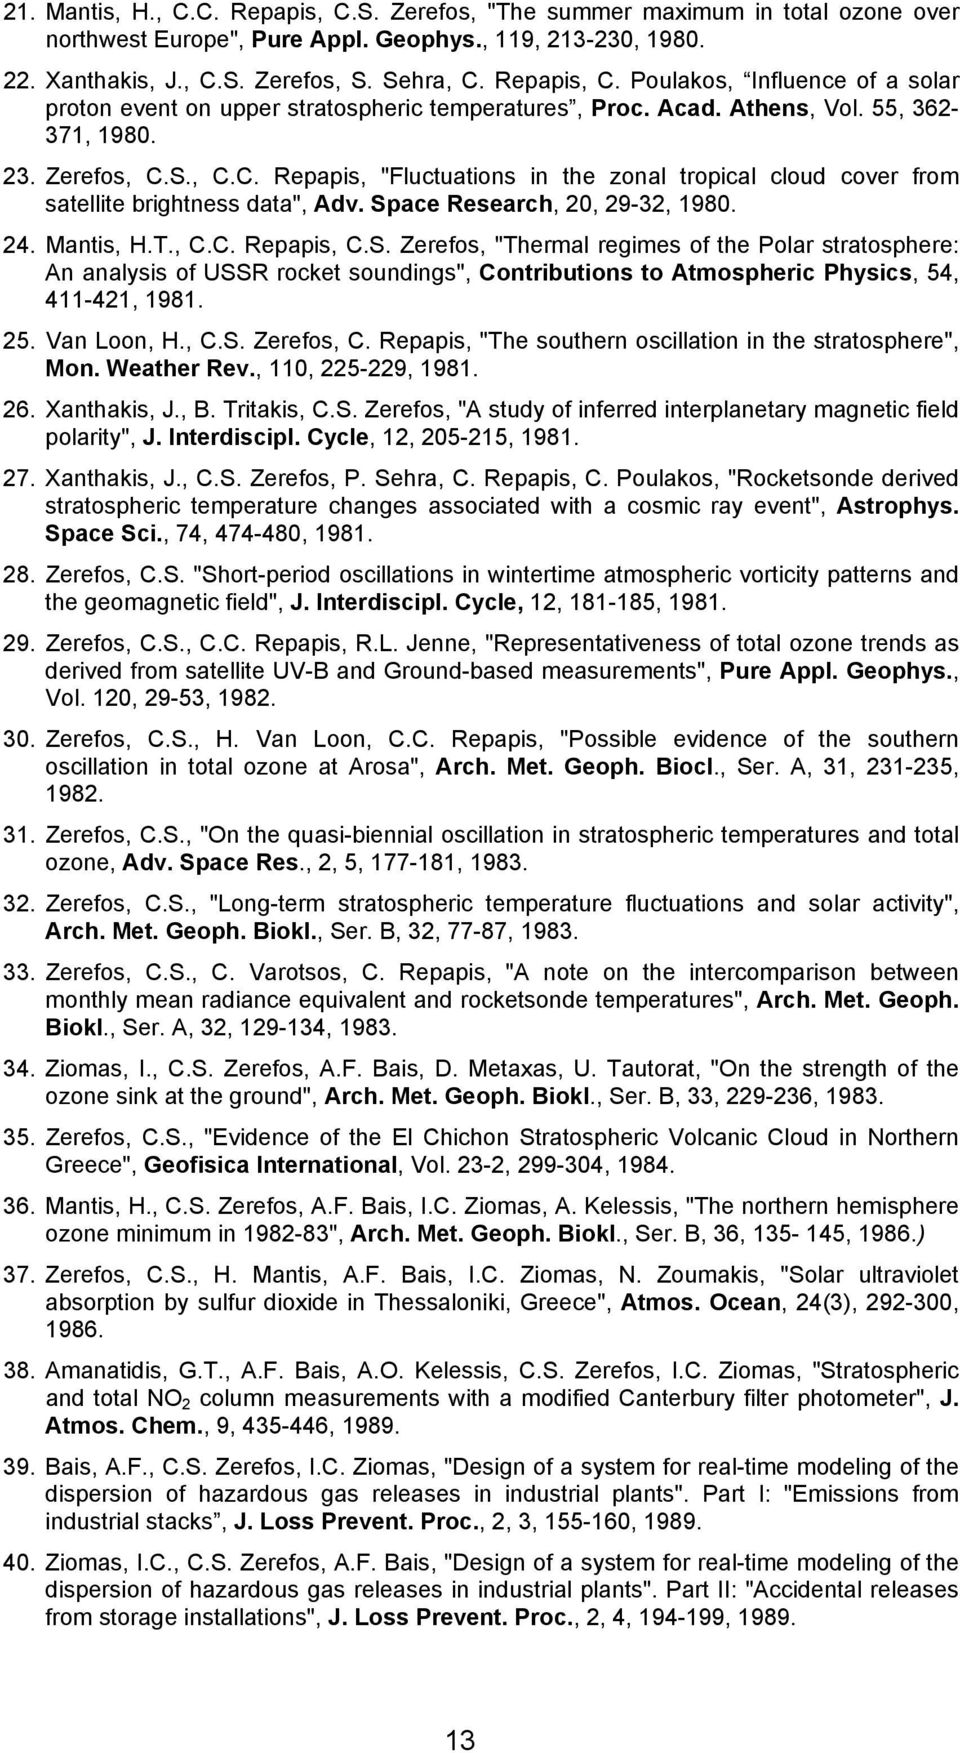 Space Research, 20, 29-32, 1980. 24. Mantis, H.T., C.C. Repapis, C.S. Zerefos, "Thermal regimes of the Polar stratosphere: An analysis of USSR rocket soundings", Contributions to Atmospheric Physics, 54, 411-421, 1981.